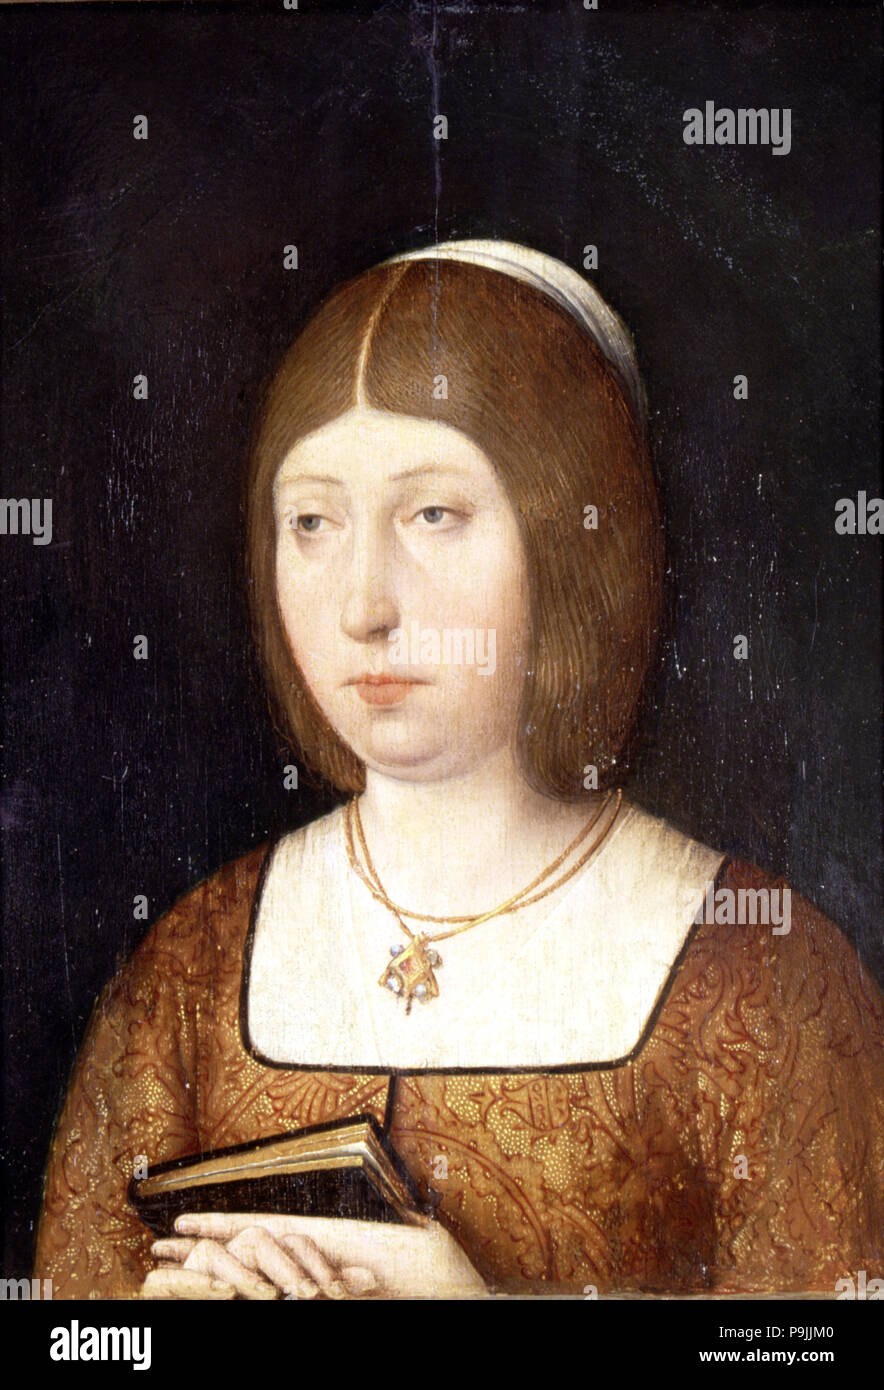 Isabel I 'The Catholic' (1451-1504), queen of Castile. Stock Photo